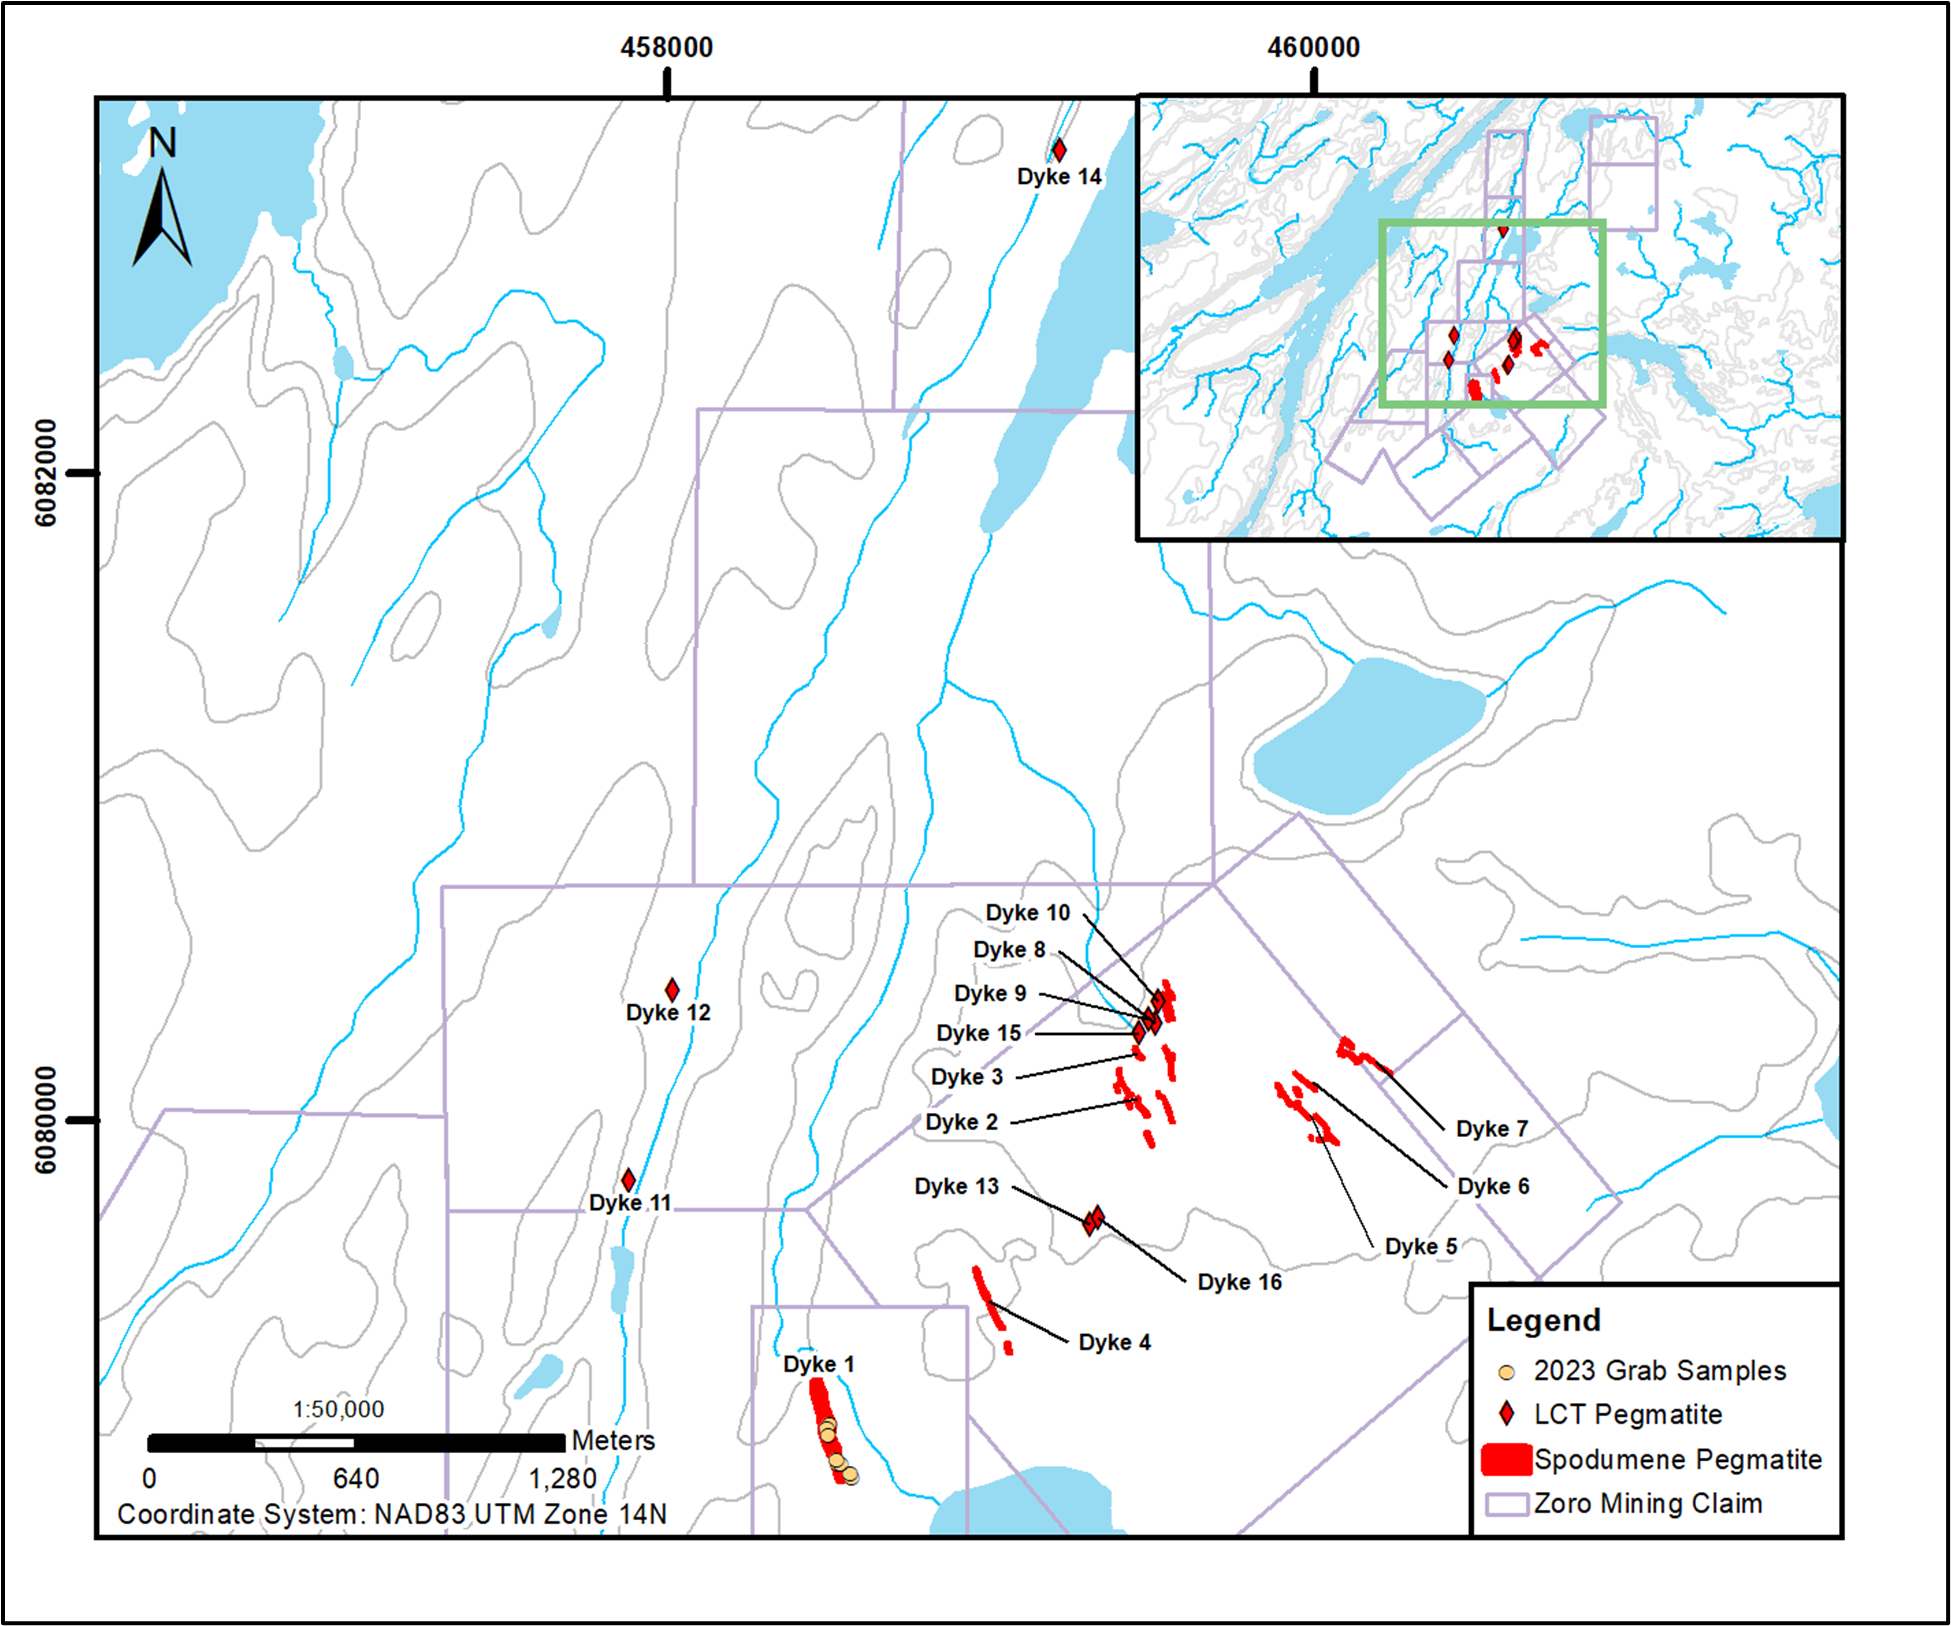 Overview of the Zoro Property showing spodumene-bearing pegmatites and untested LCT pegmatites which are targets for future exploration.